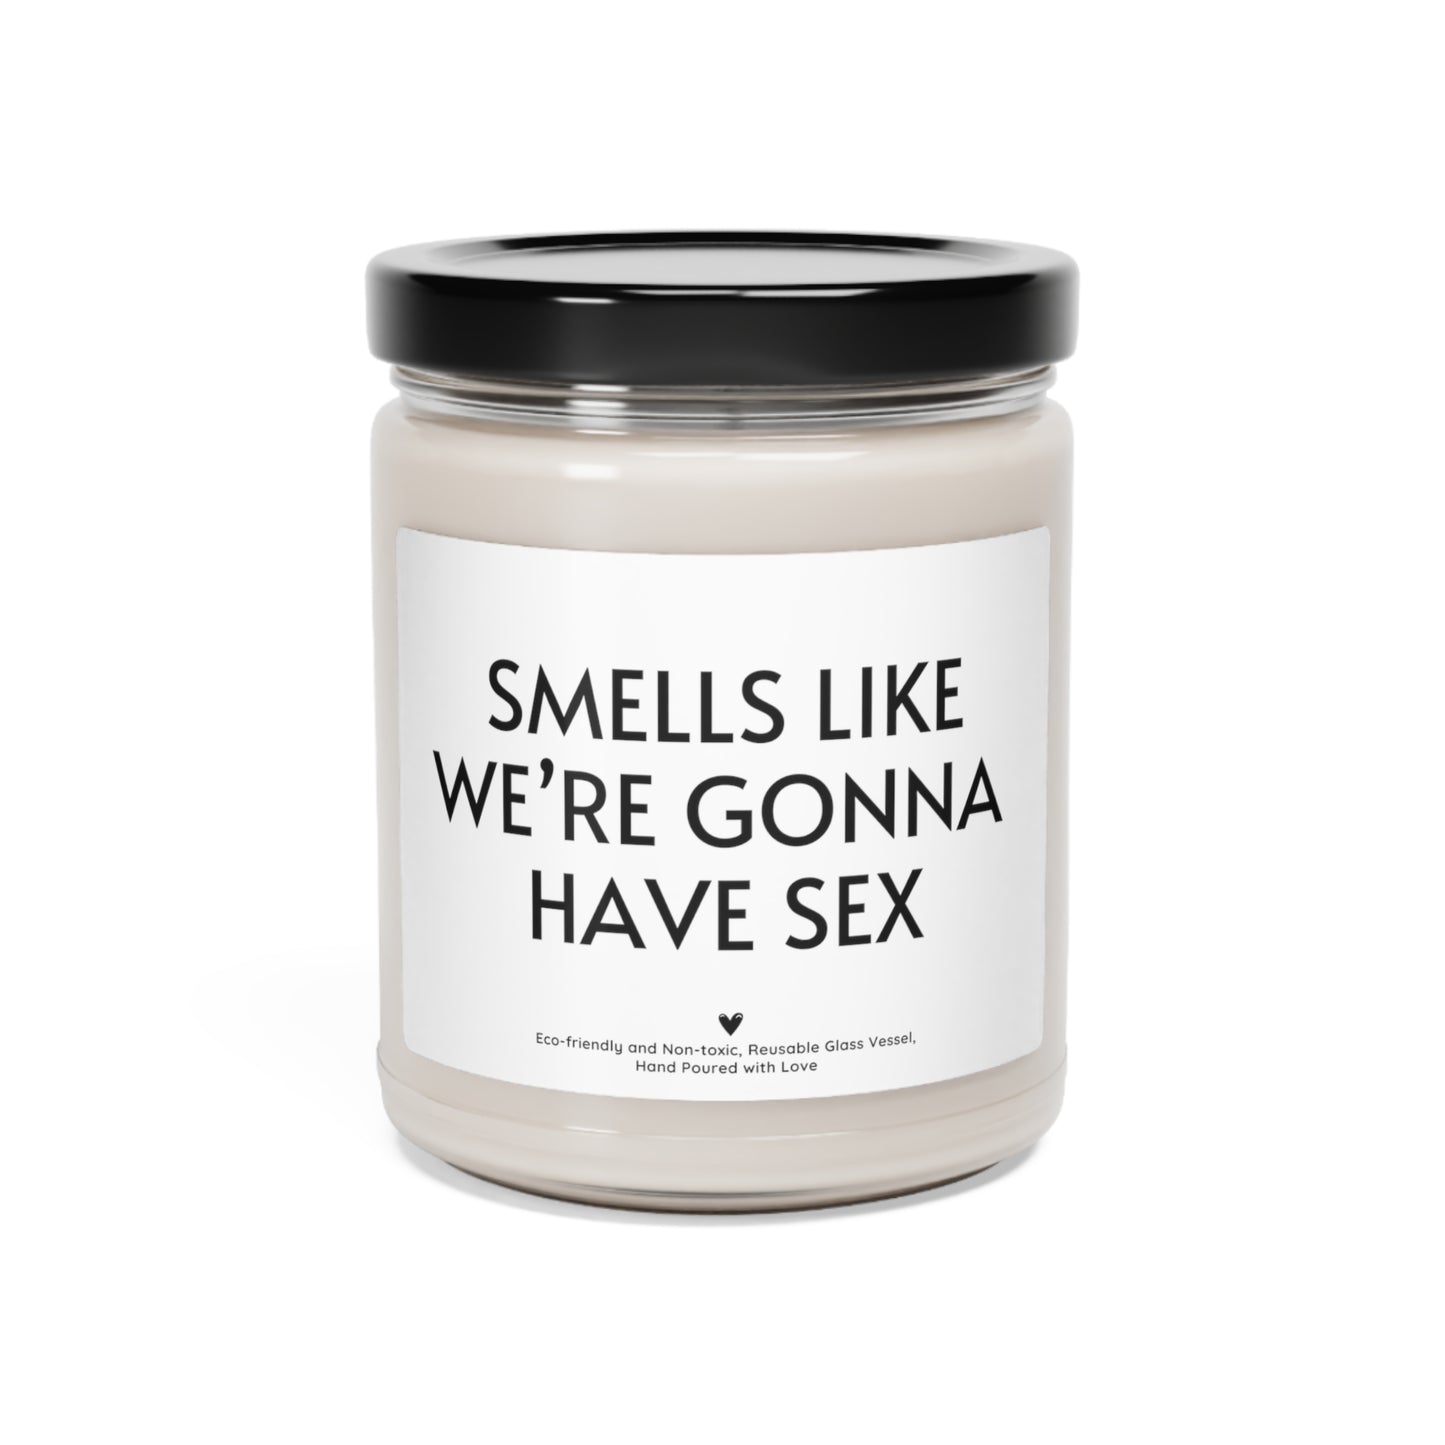 7.Scented Soy Candle, 9oz